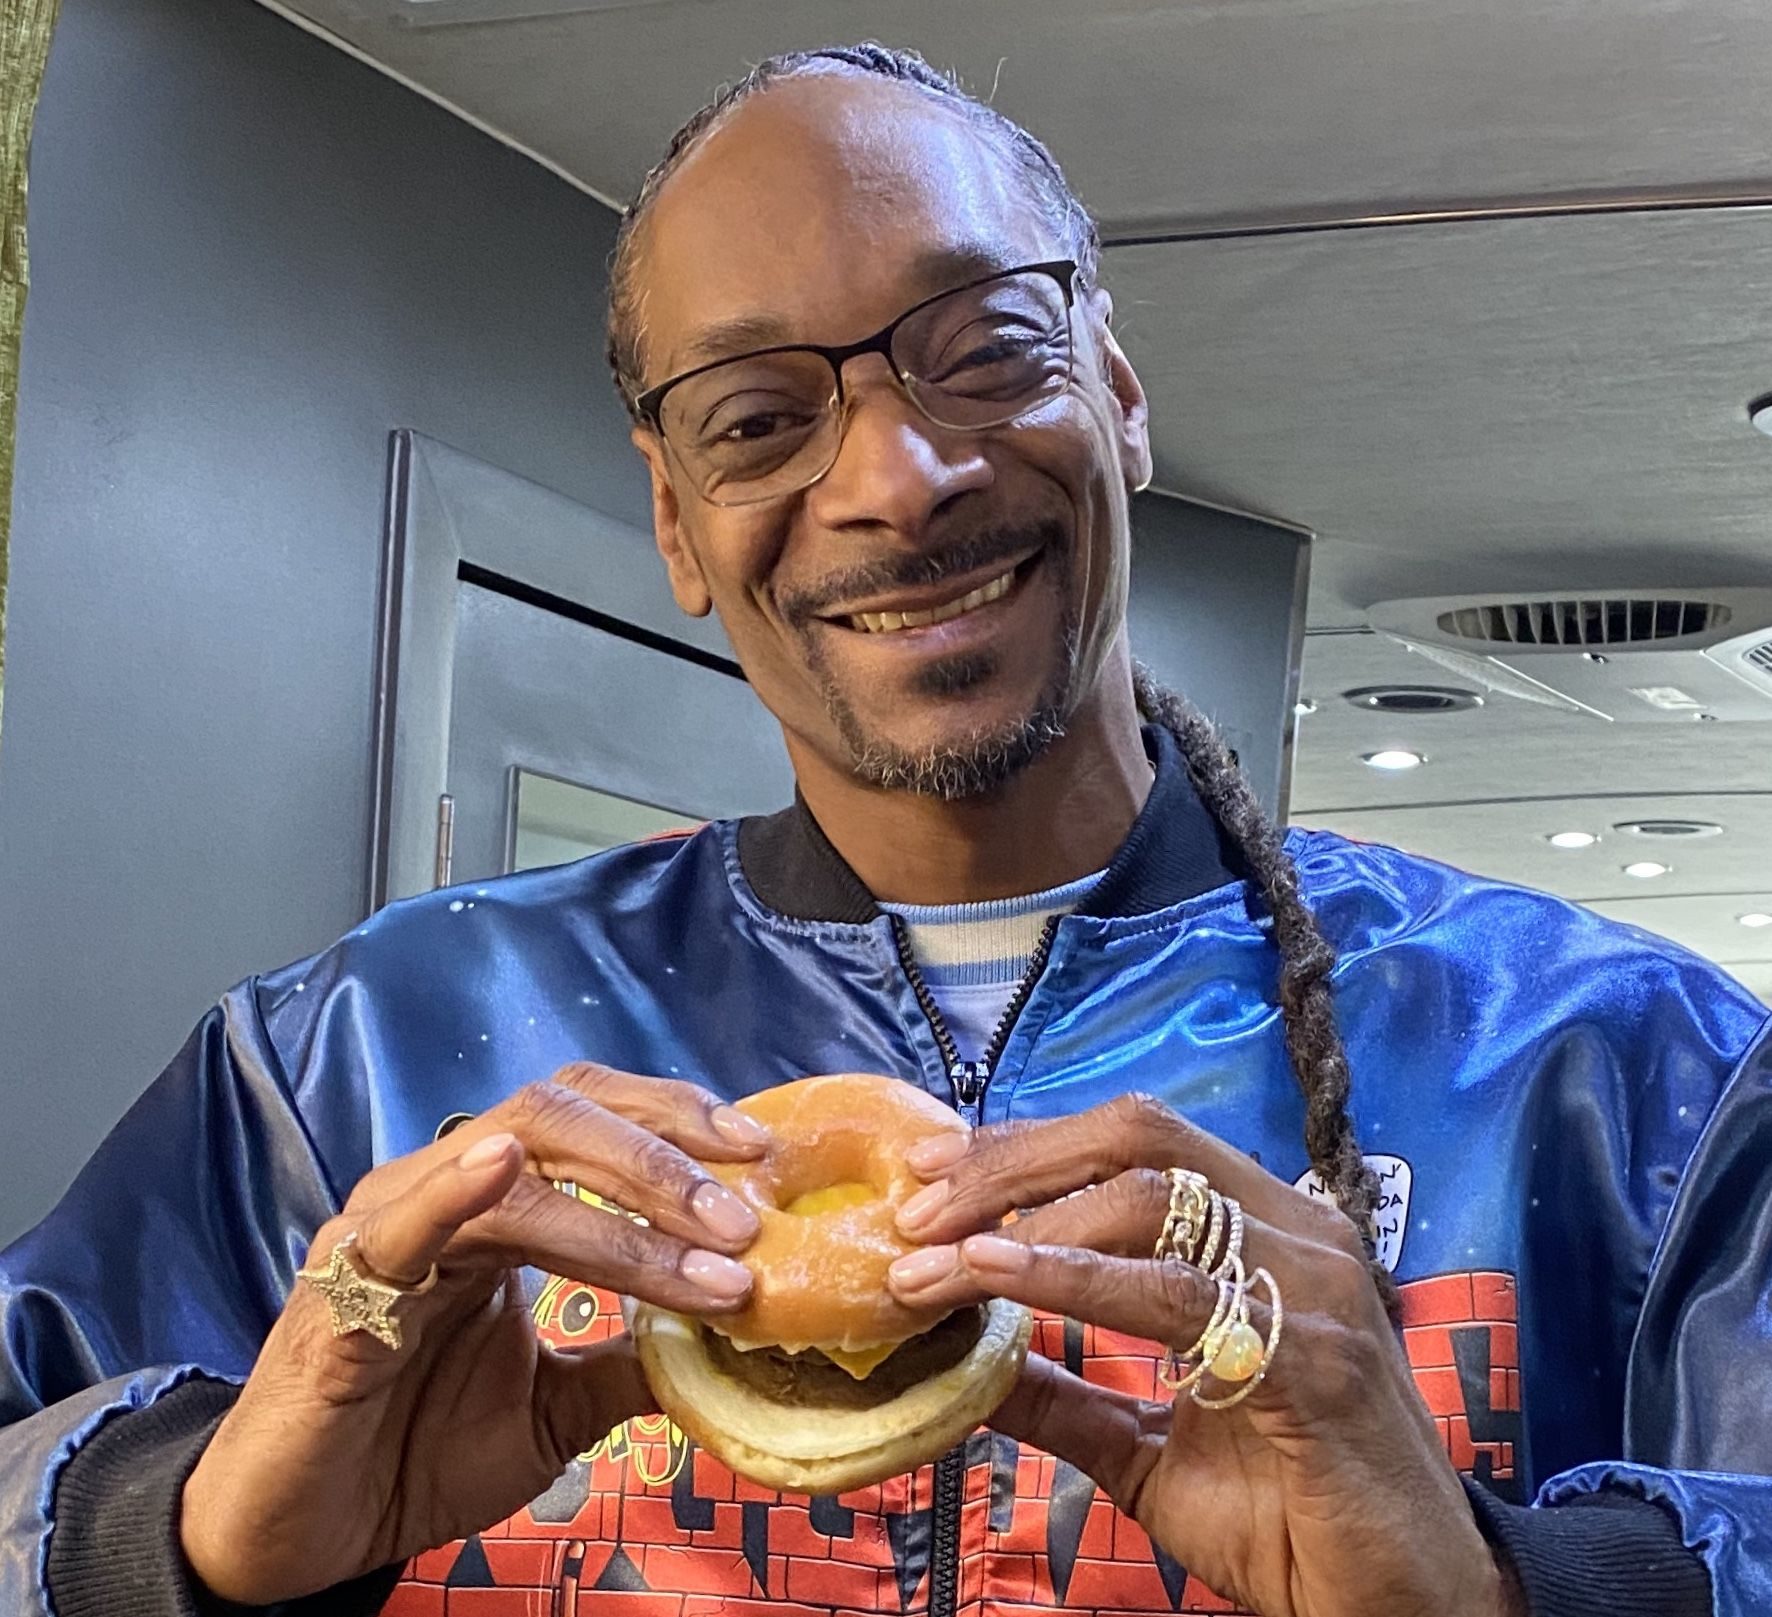 Dogg takes activism to new heights with 'Beyond D-O-Double Sandwich' creation